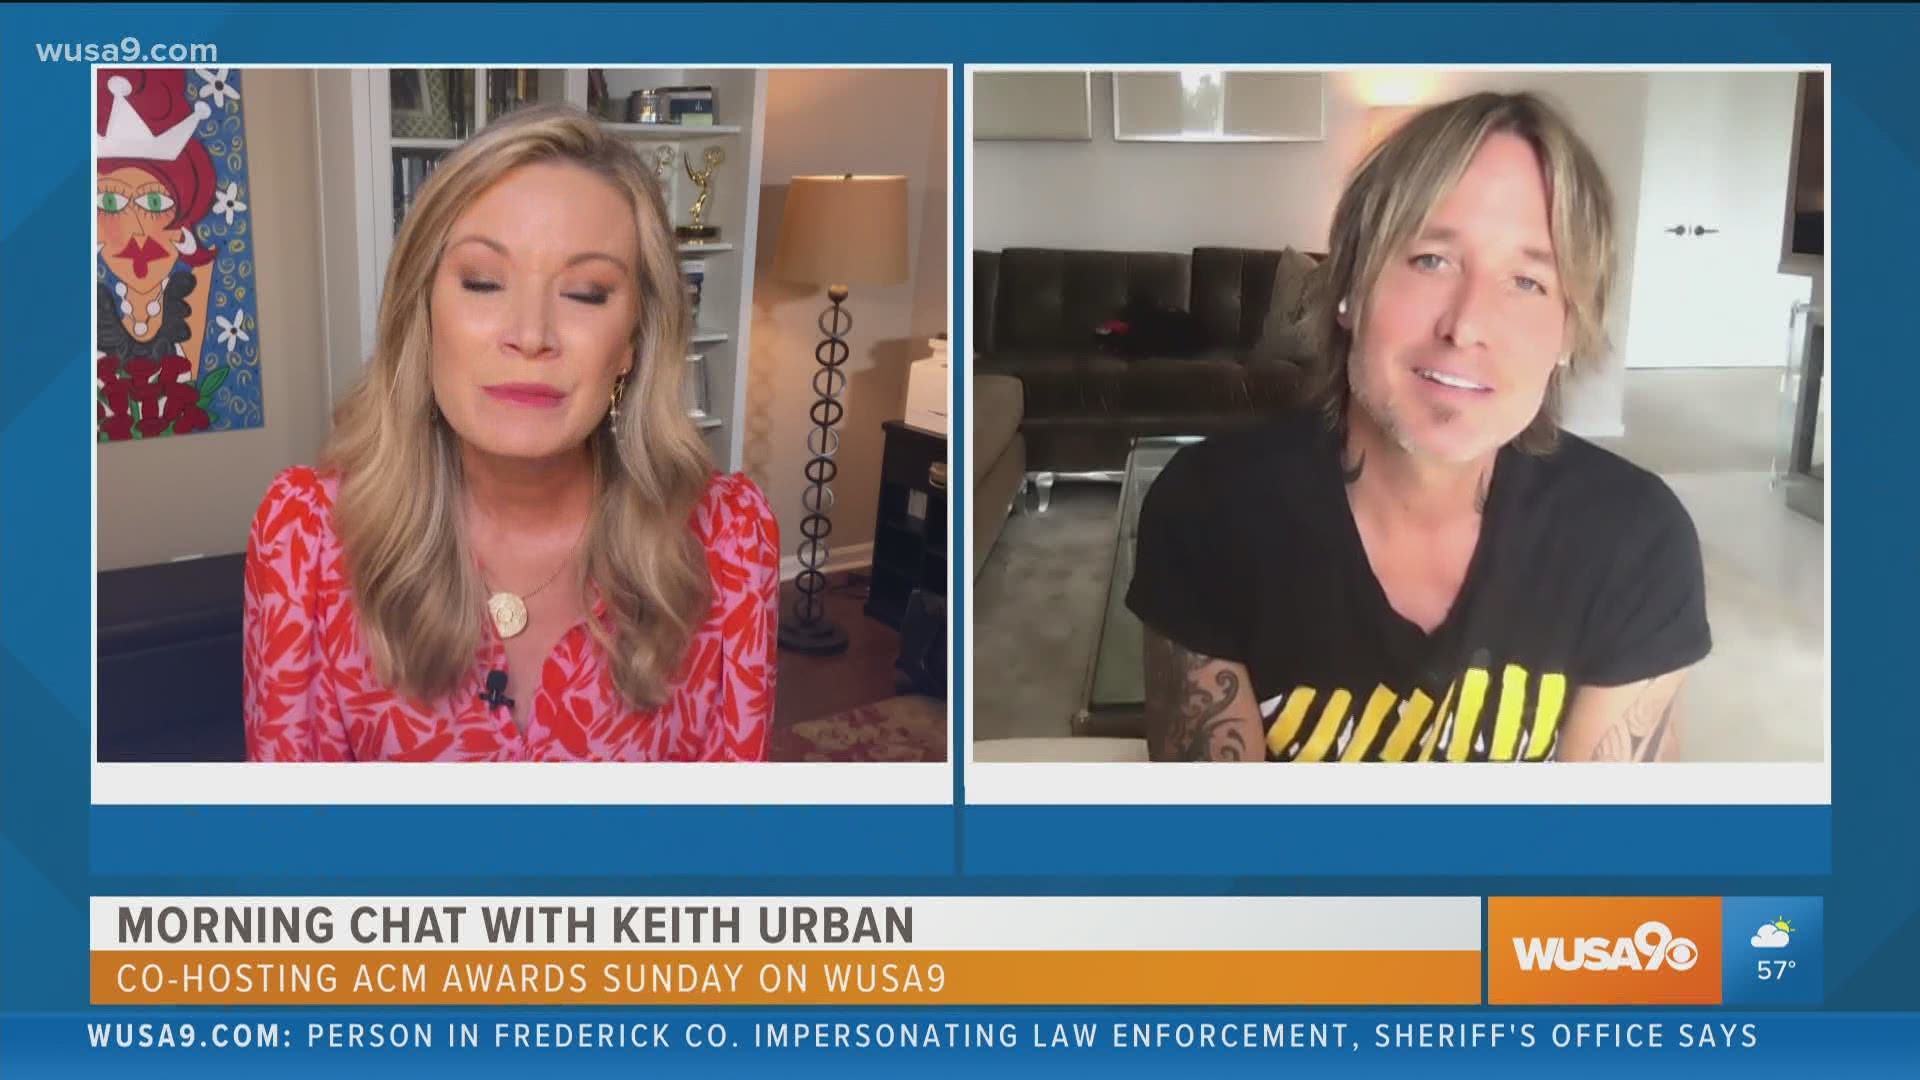 Country star Keith Urban chats with Kristen about the Country Music Awards and more.